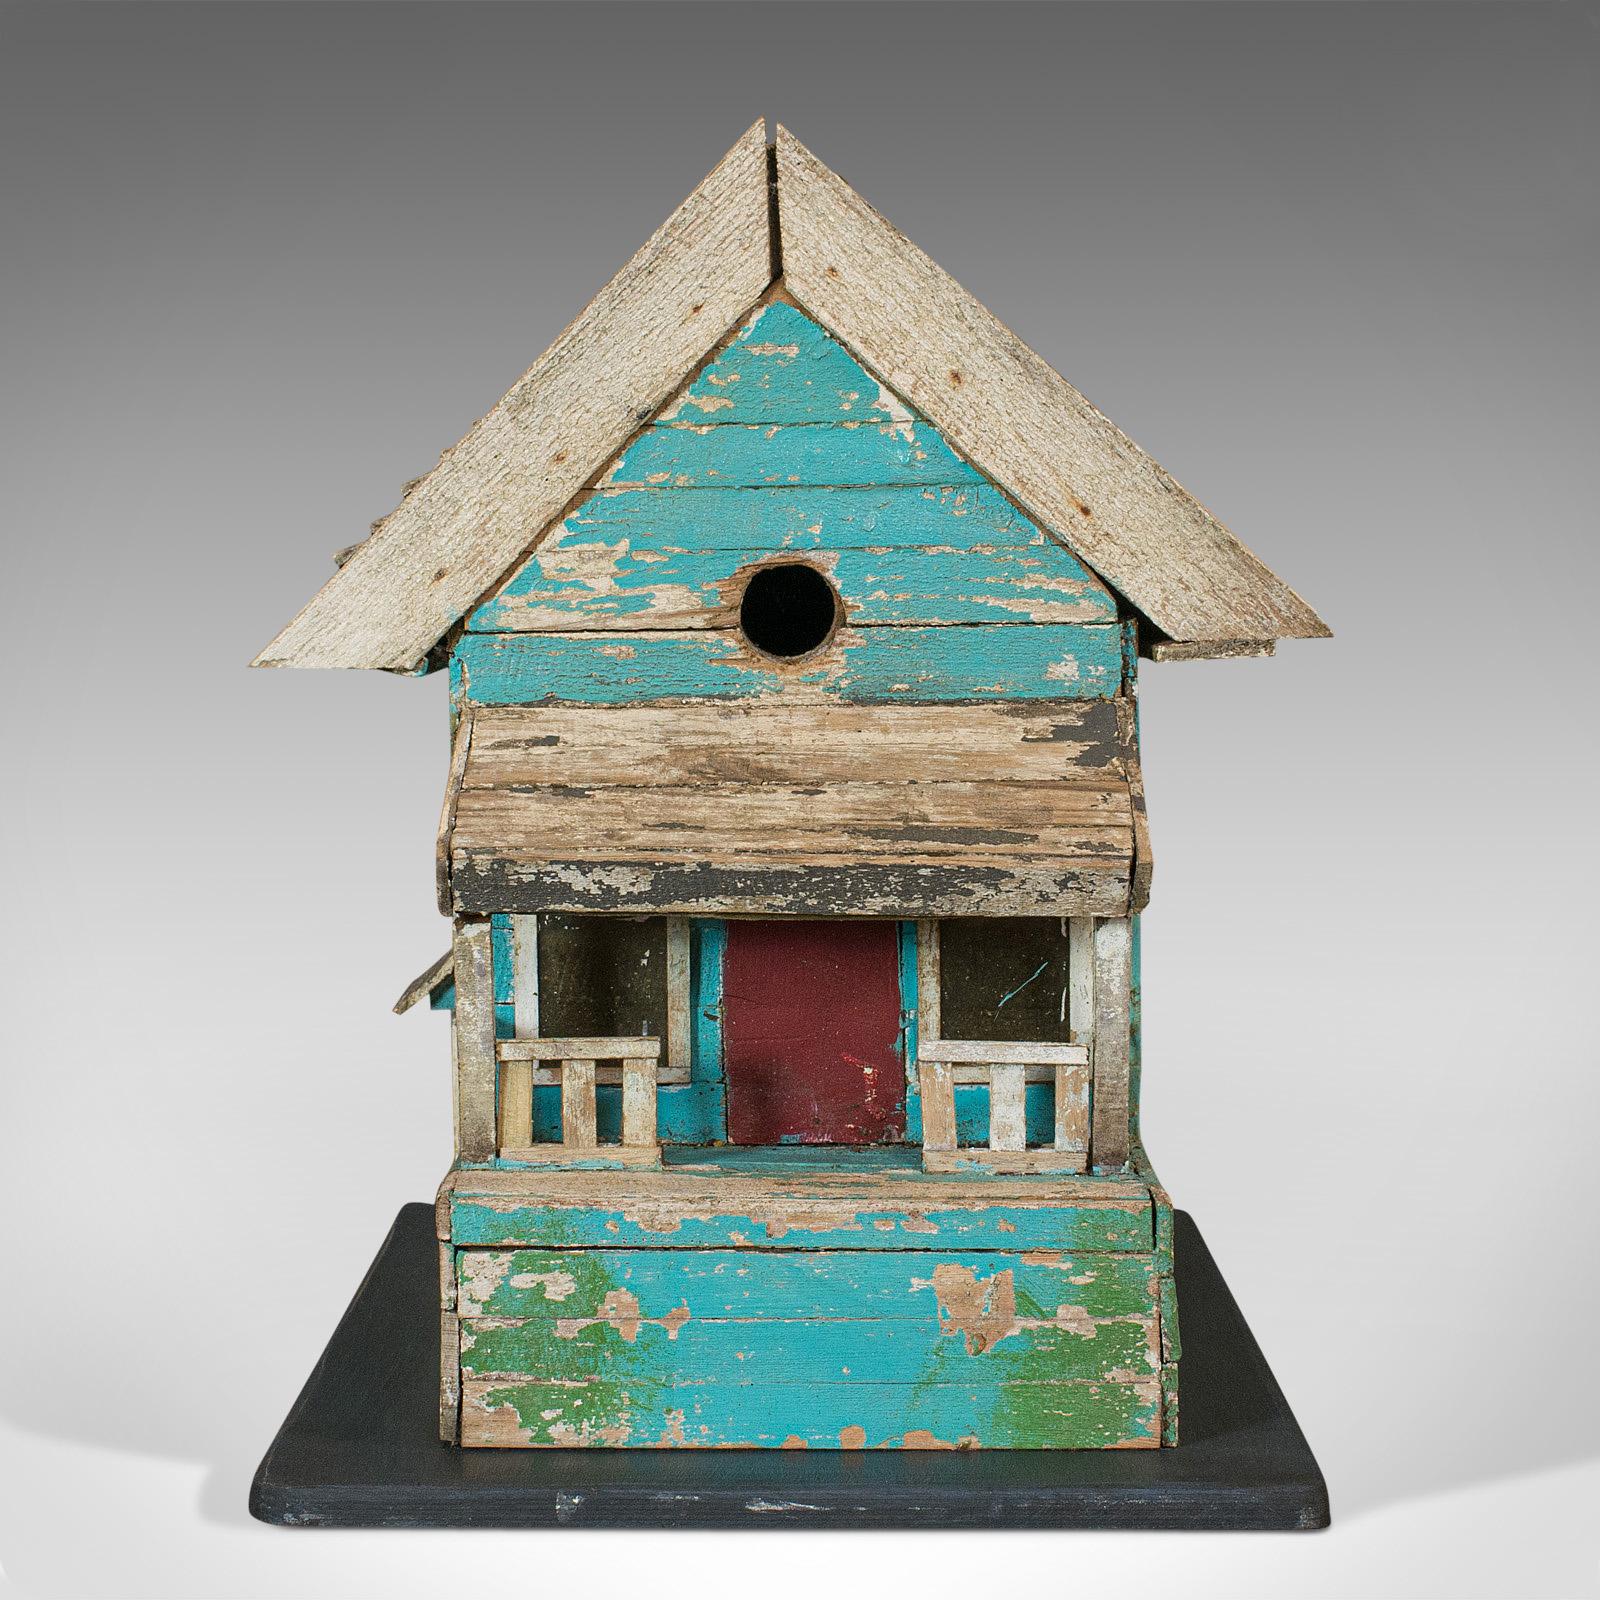 This is a vintage folk art birdhouse. An American, scratch built pine twin bird house with a distinctly midwestern folksy taste, dating to the mid-20th century, circa 1960.

A little birdhouse for your soul
Displays a desirable aged patina
Hand